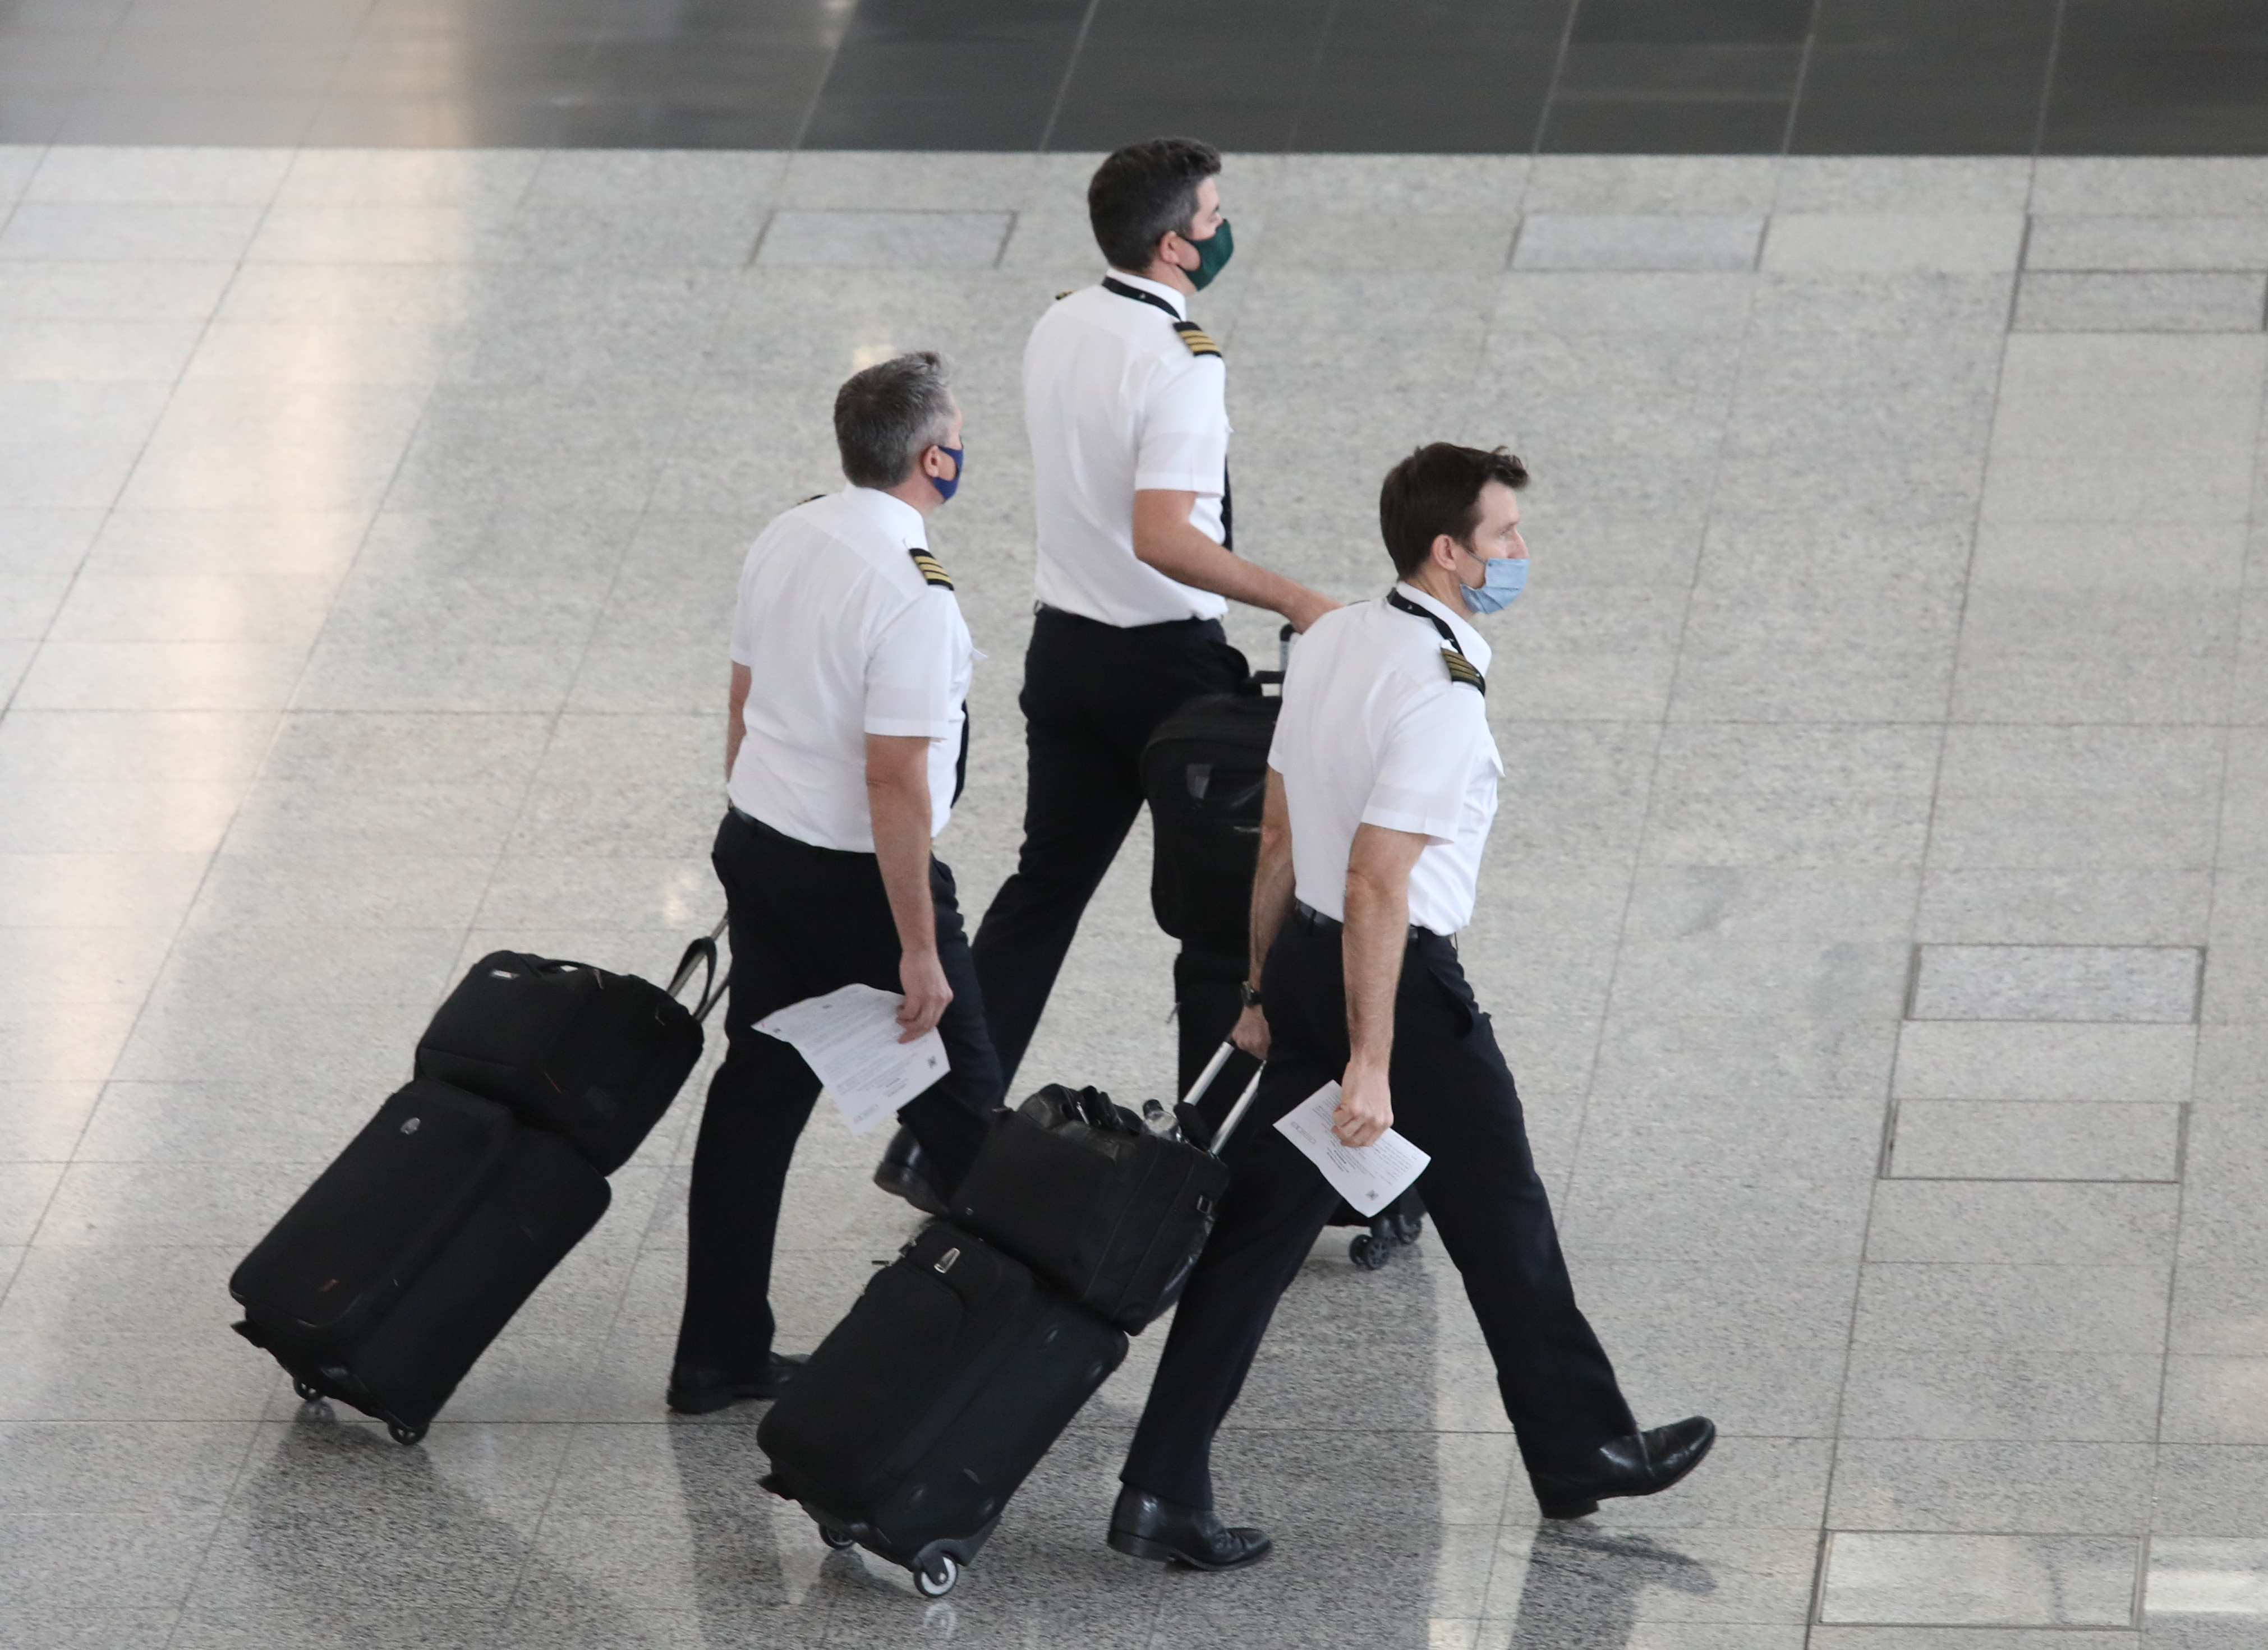 Pilots at the arrival hall in the Hong Kong International Airport. The new The initiative would mark the first close collaboration between Hong Kong and the mainland over training pilots. Photo: Yik Yeung-man